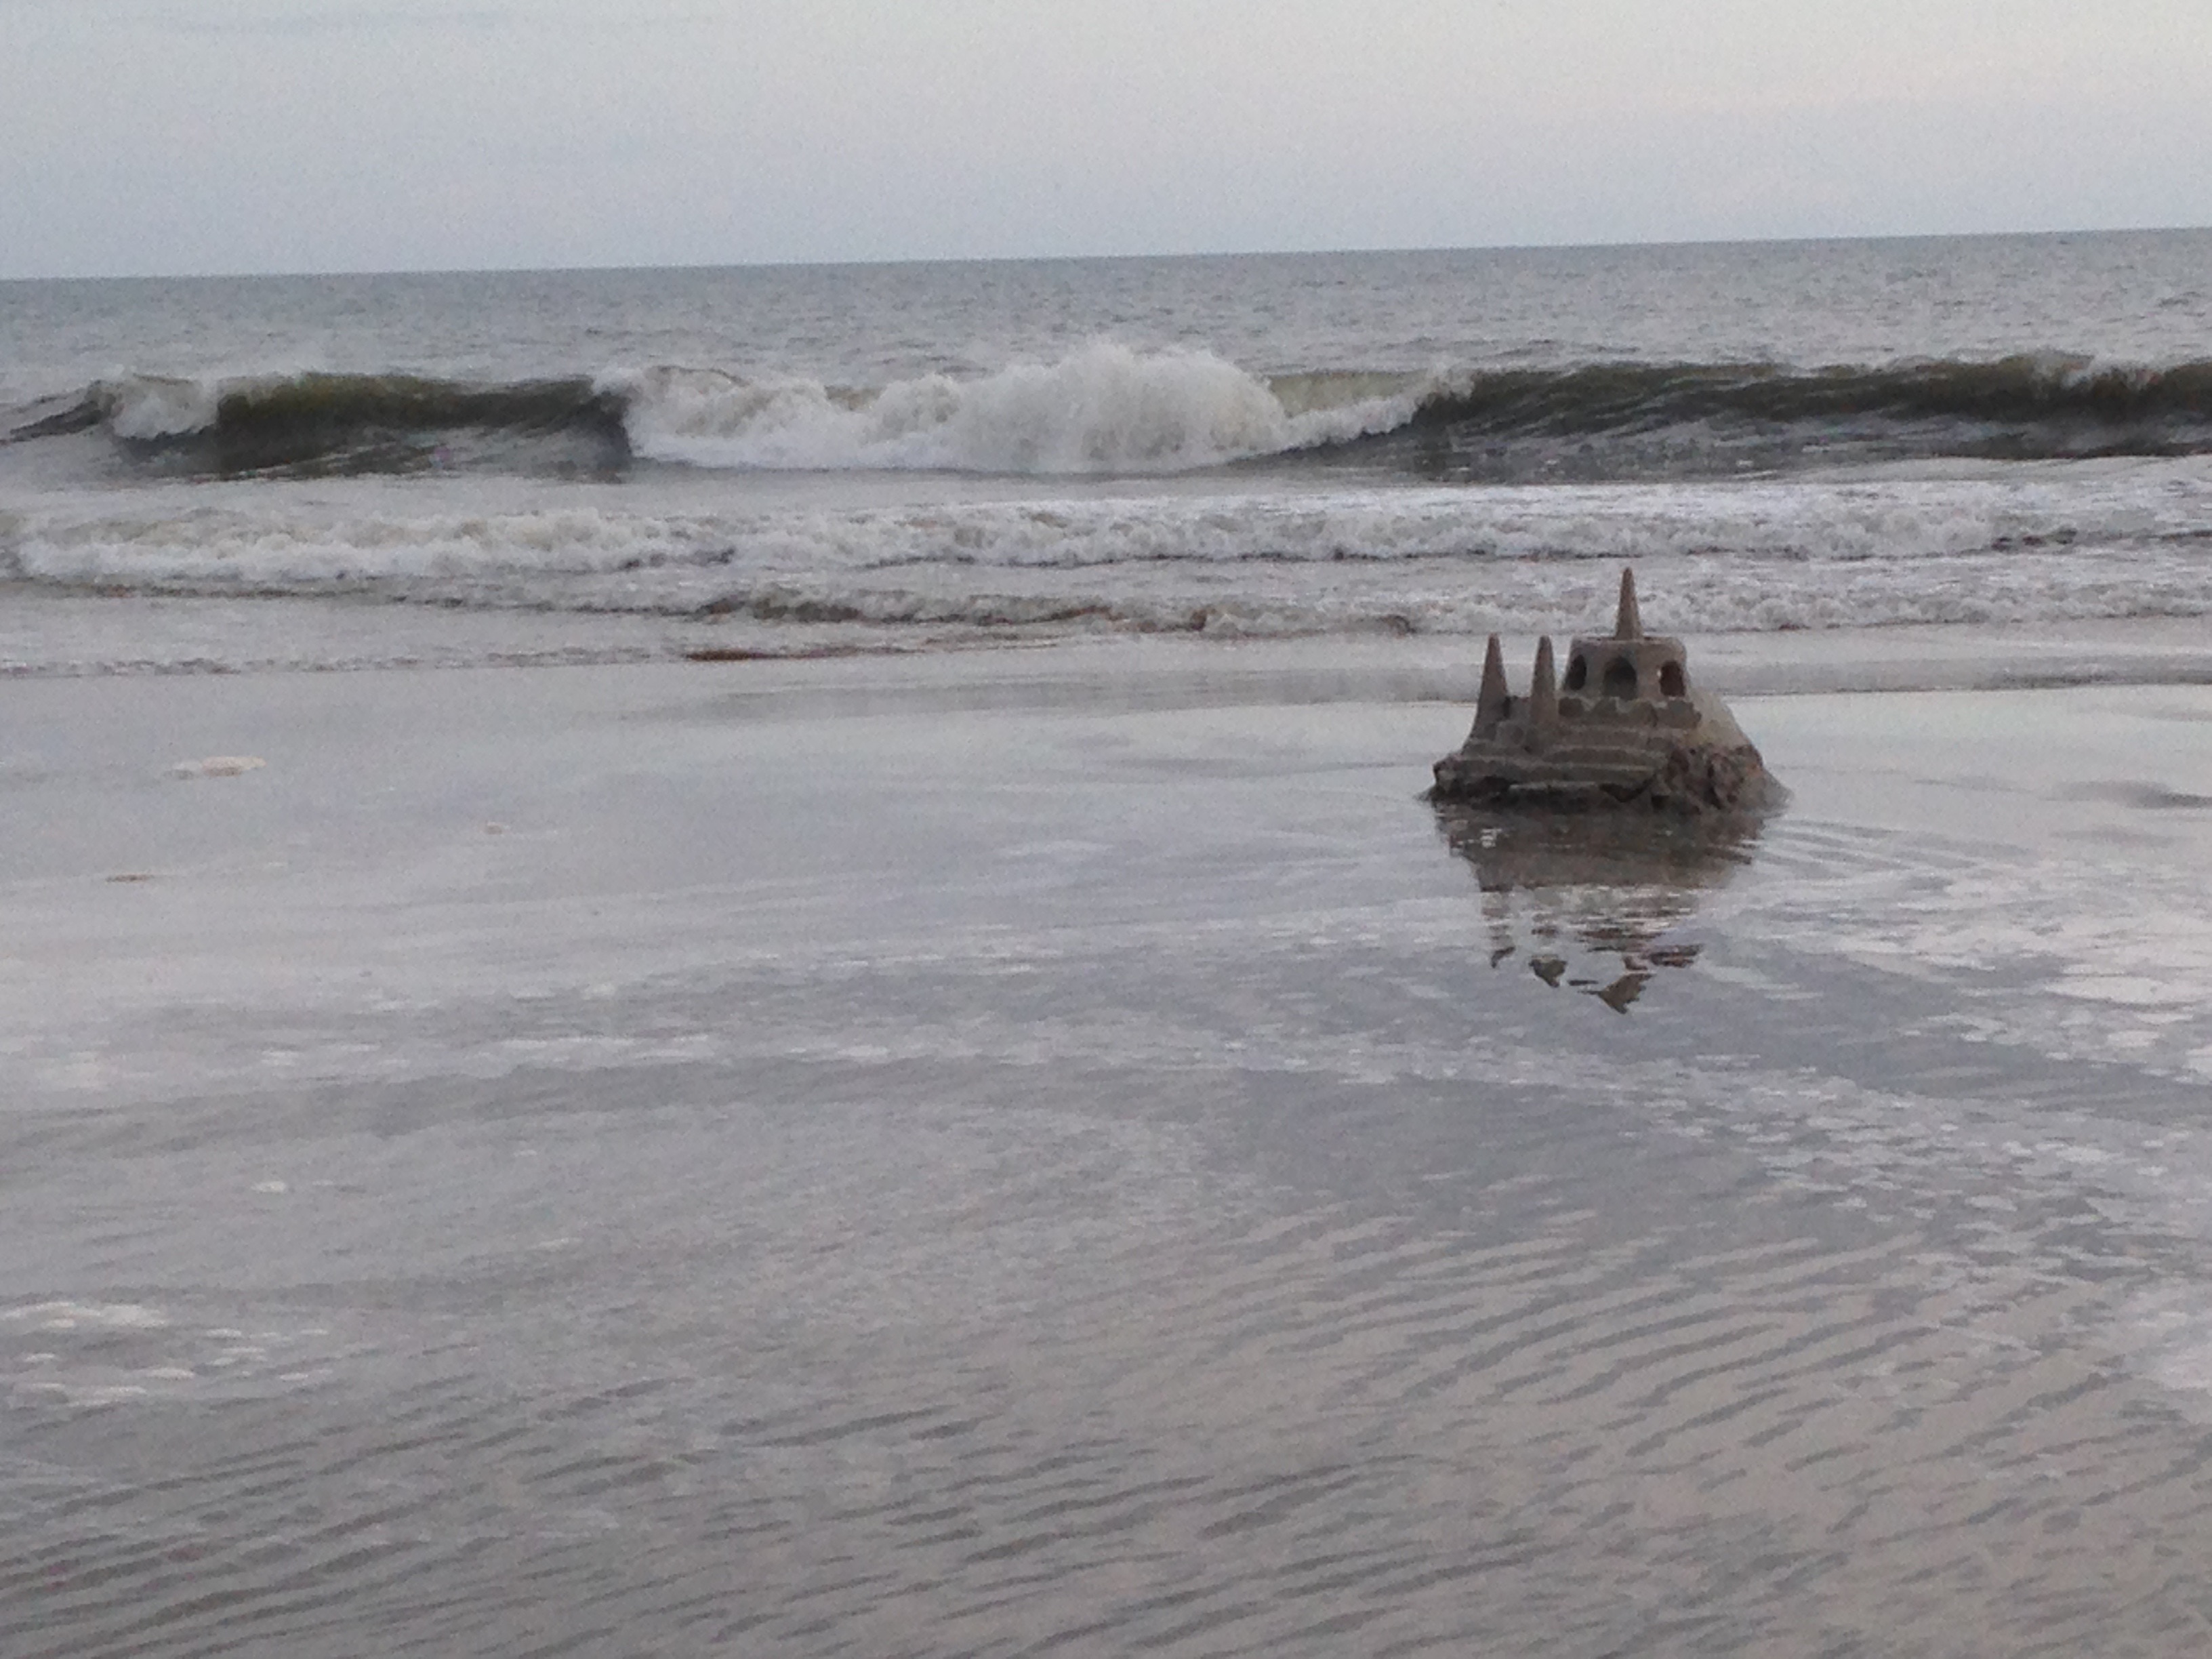 Sandcastle being washed away